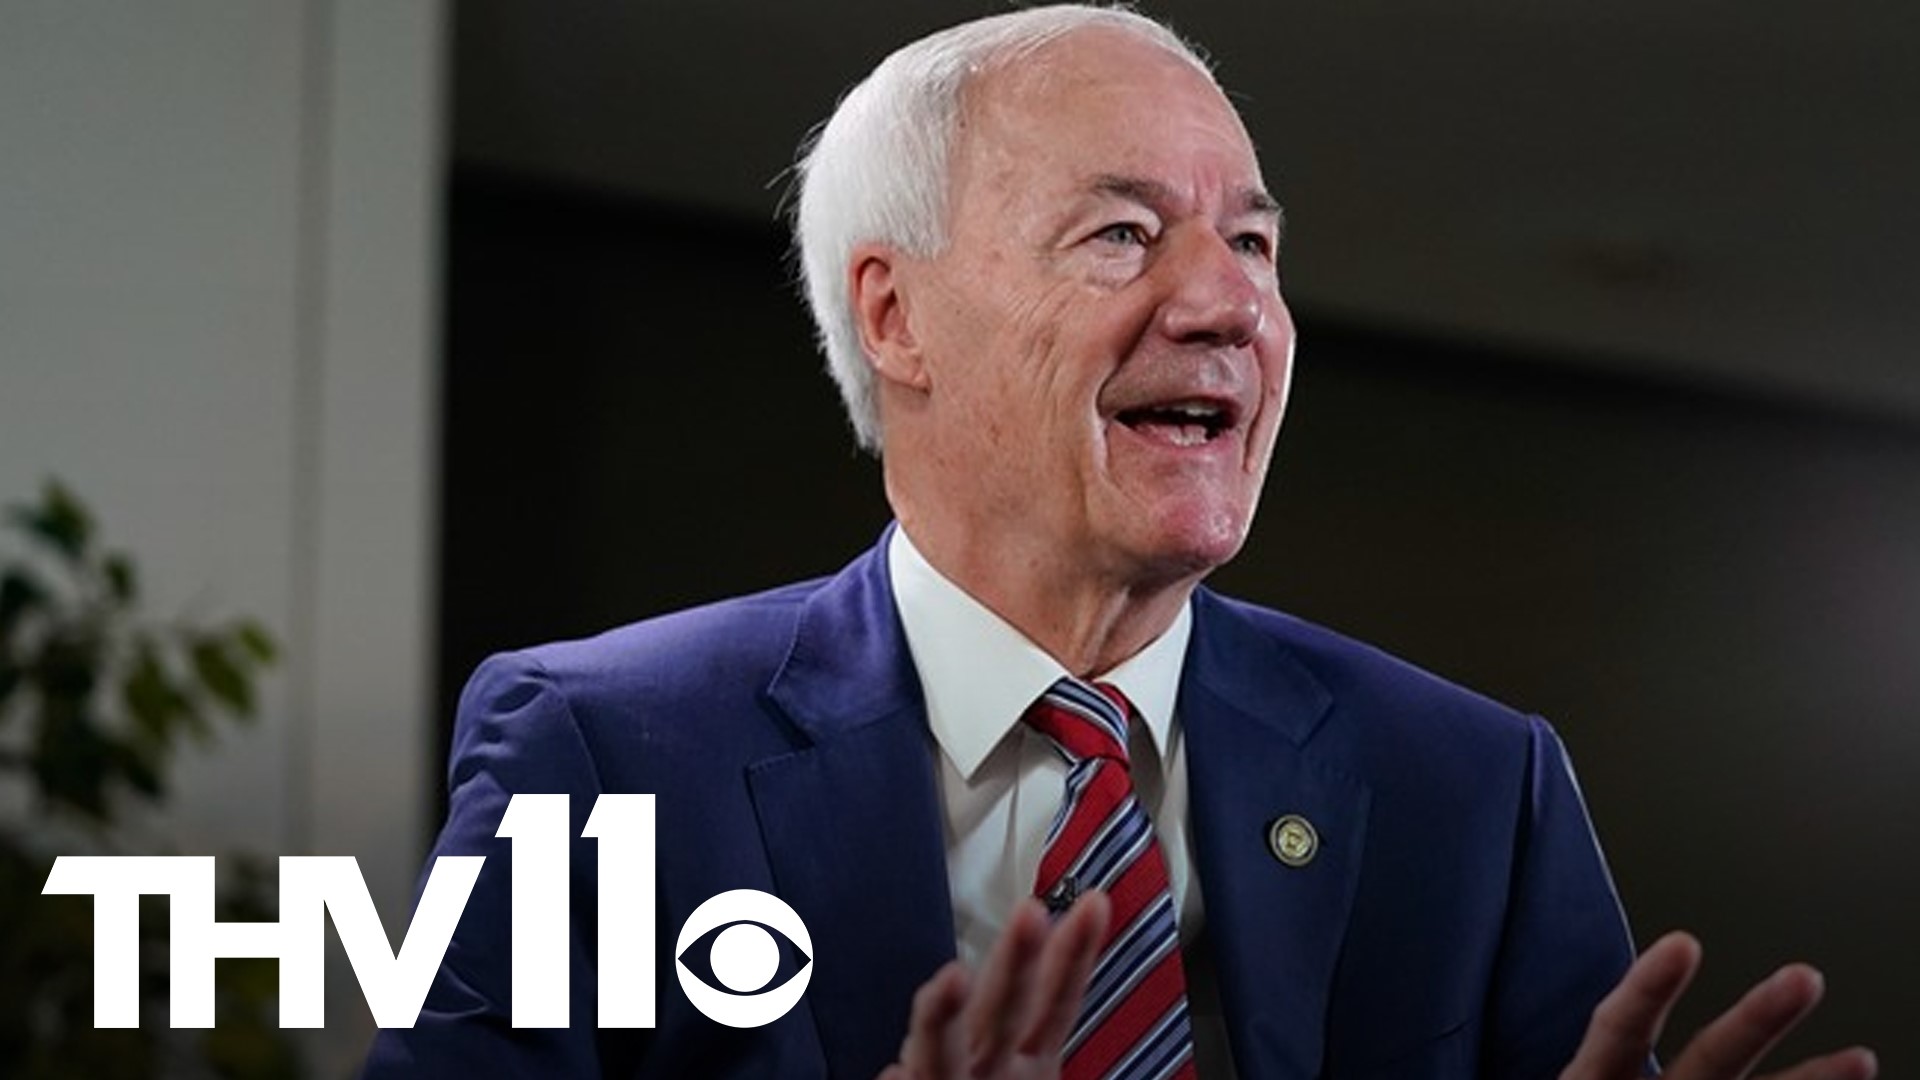 The former Governor of Arkansas made the announcement of his presidential run on Sunday morning.